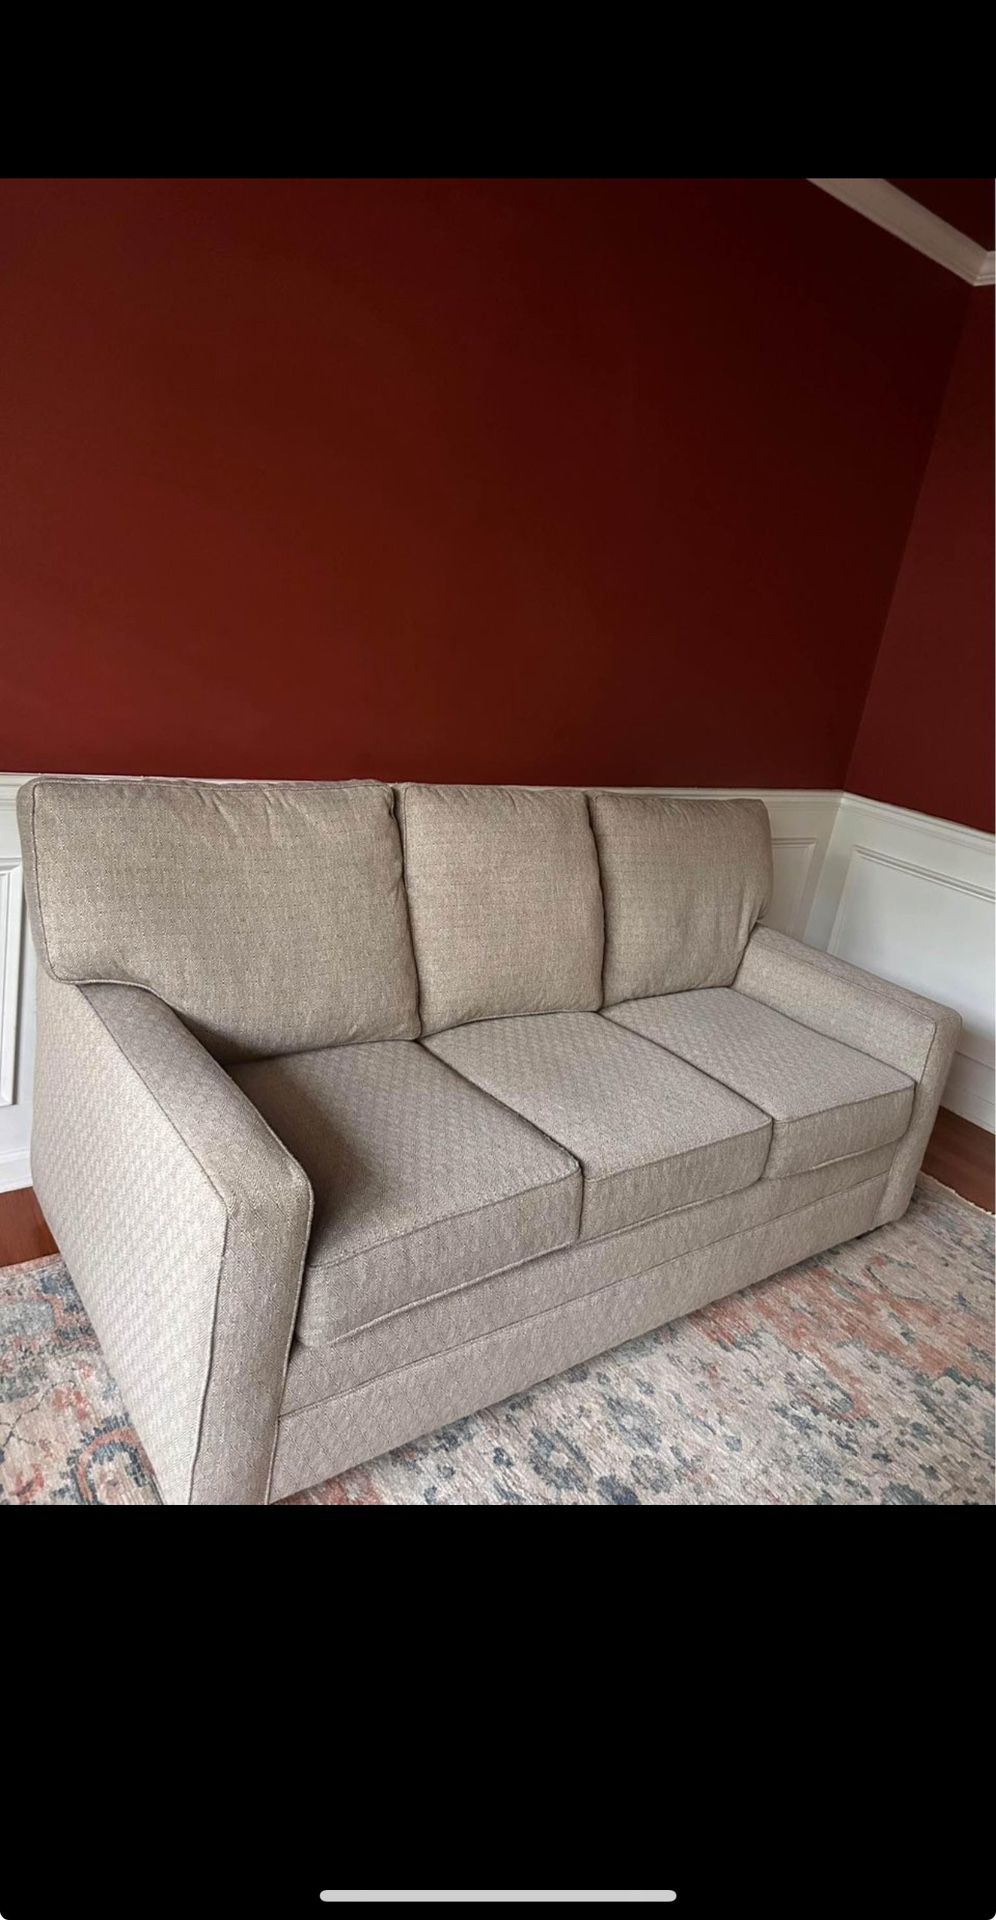 New Beige/Gray Kincaid Couch FREE DELIVERY 